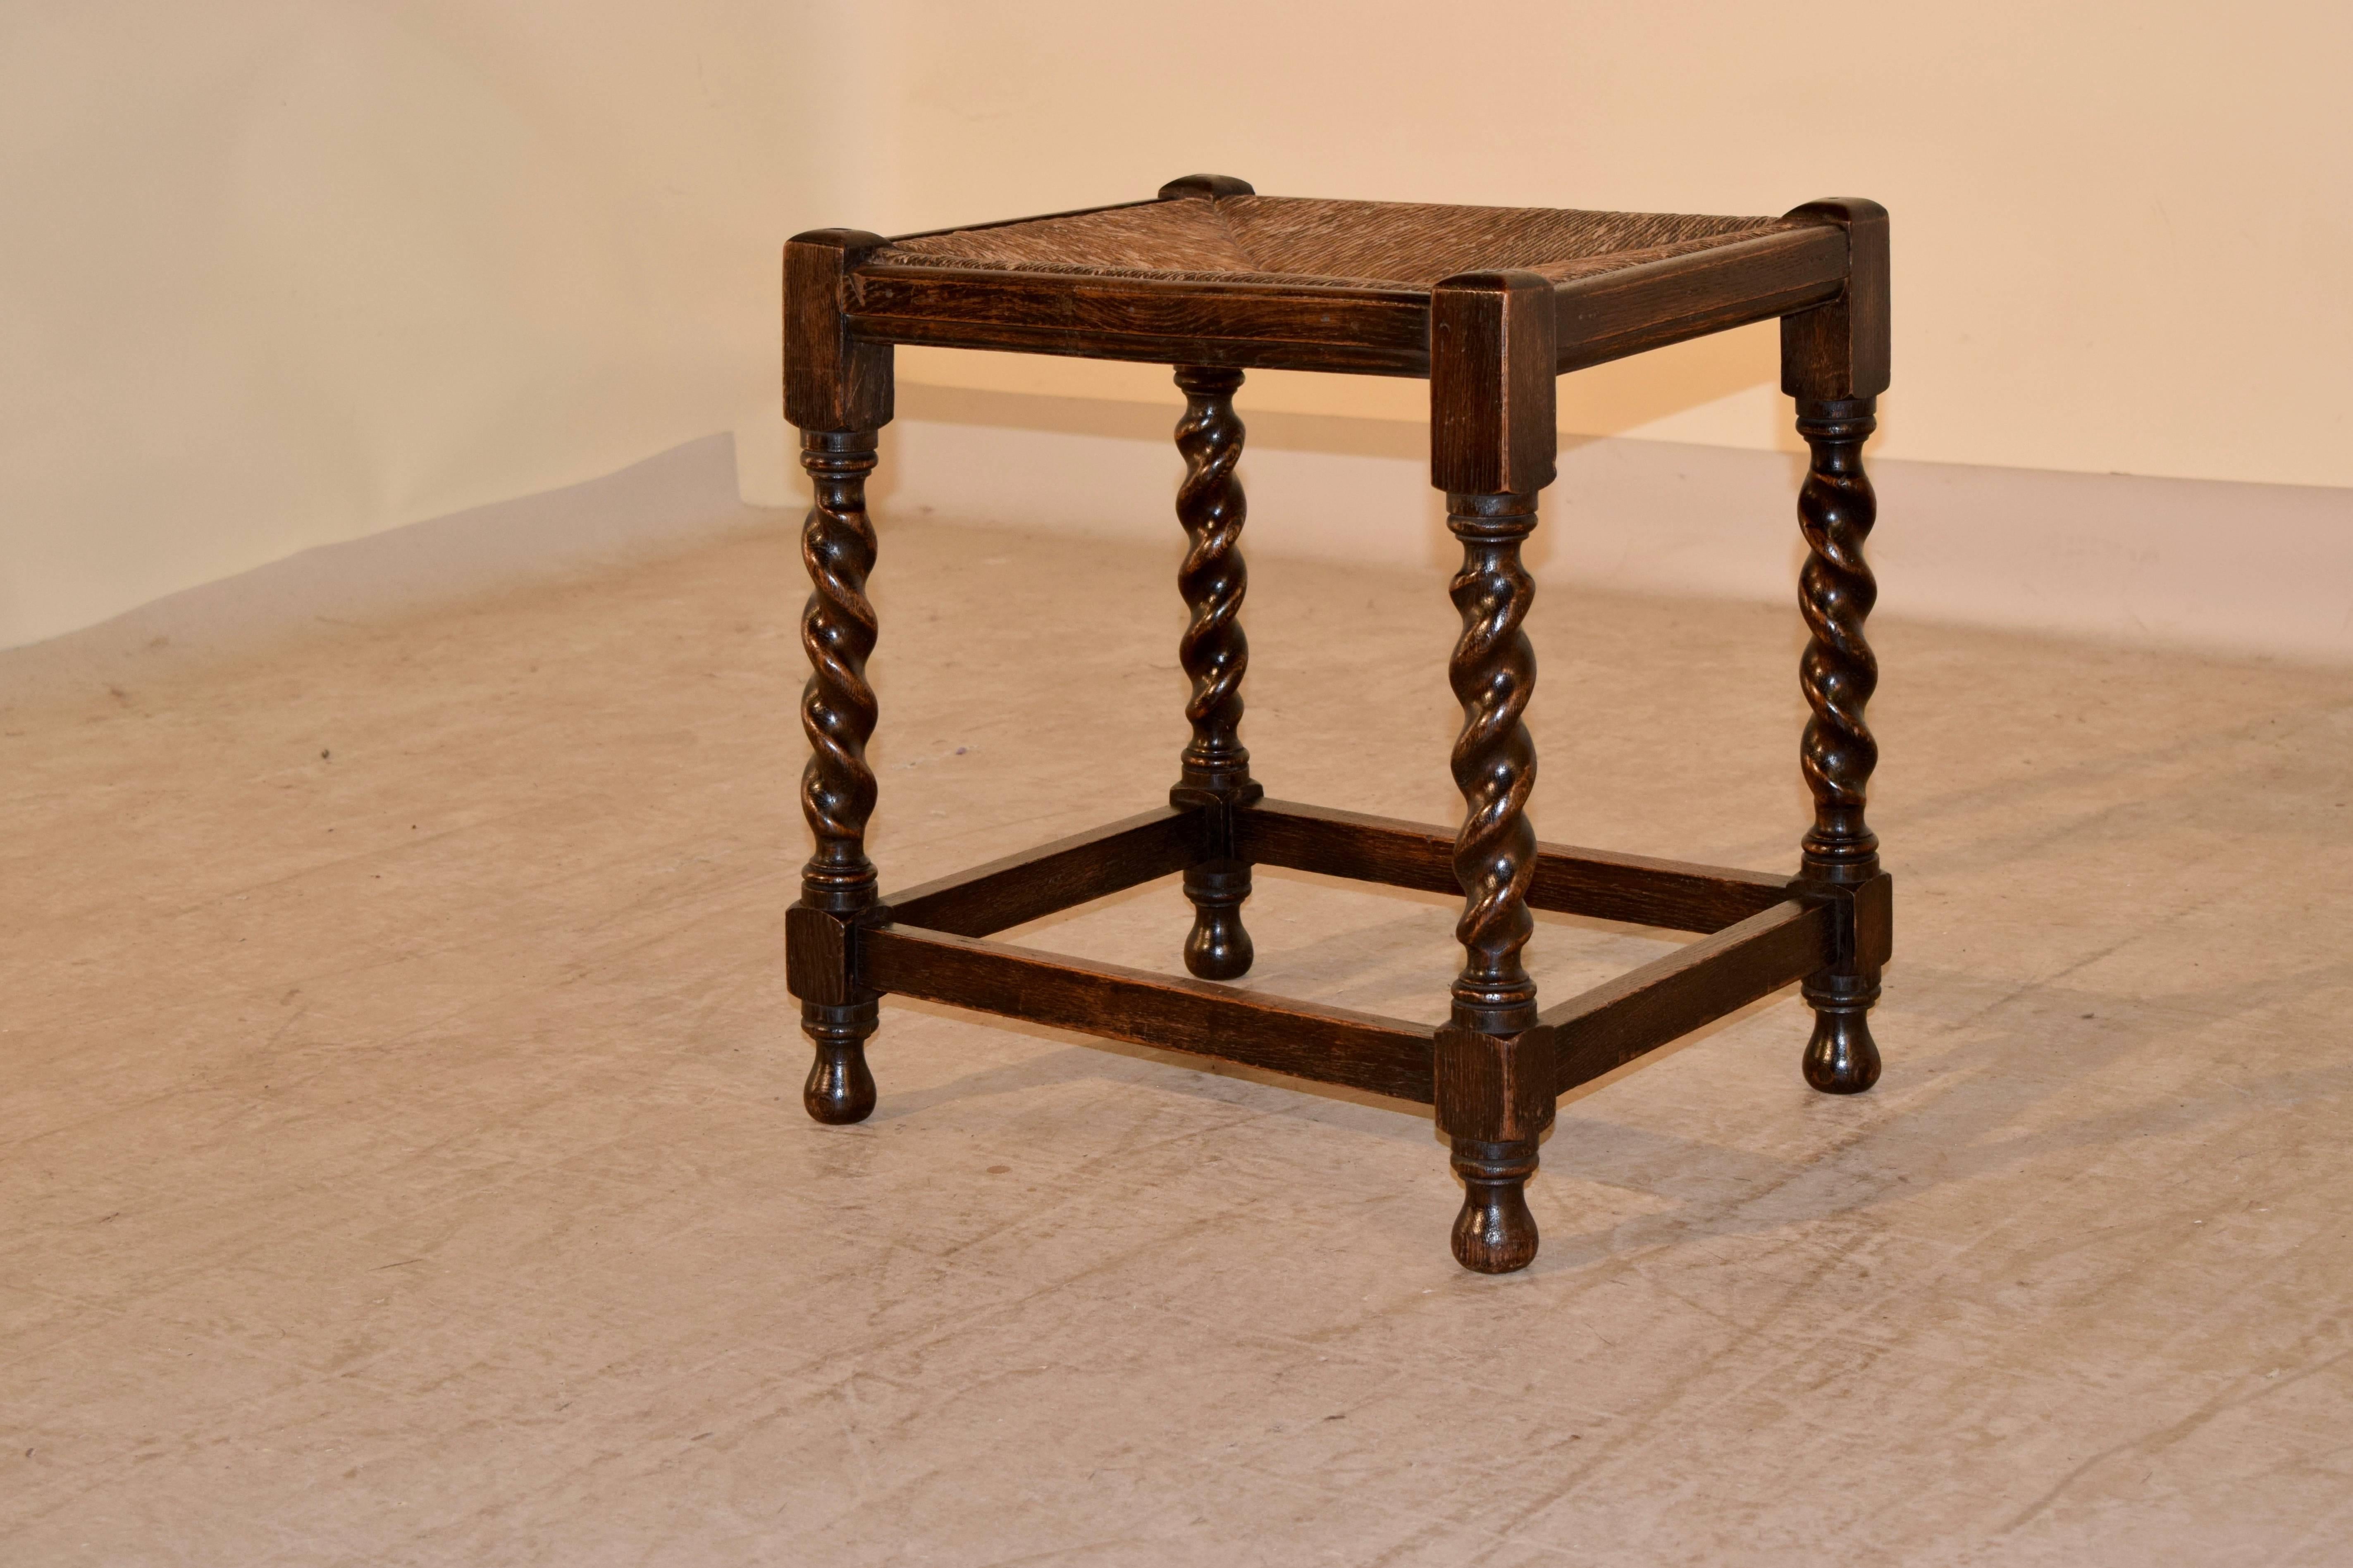 19th century English oak stool with hand-turned barley twist legs, joined by simple stretchers and a handwoven rush seat.